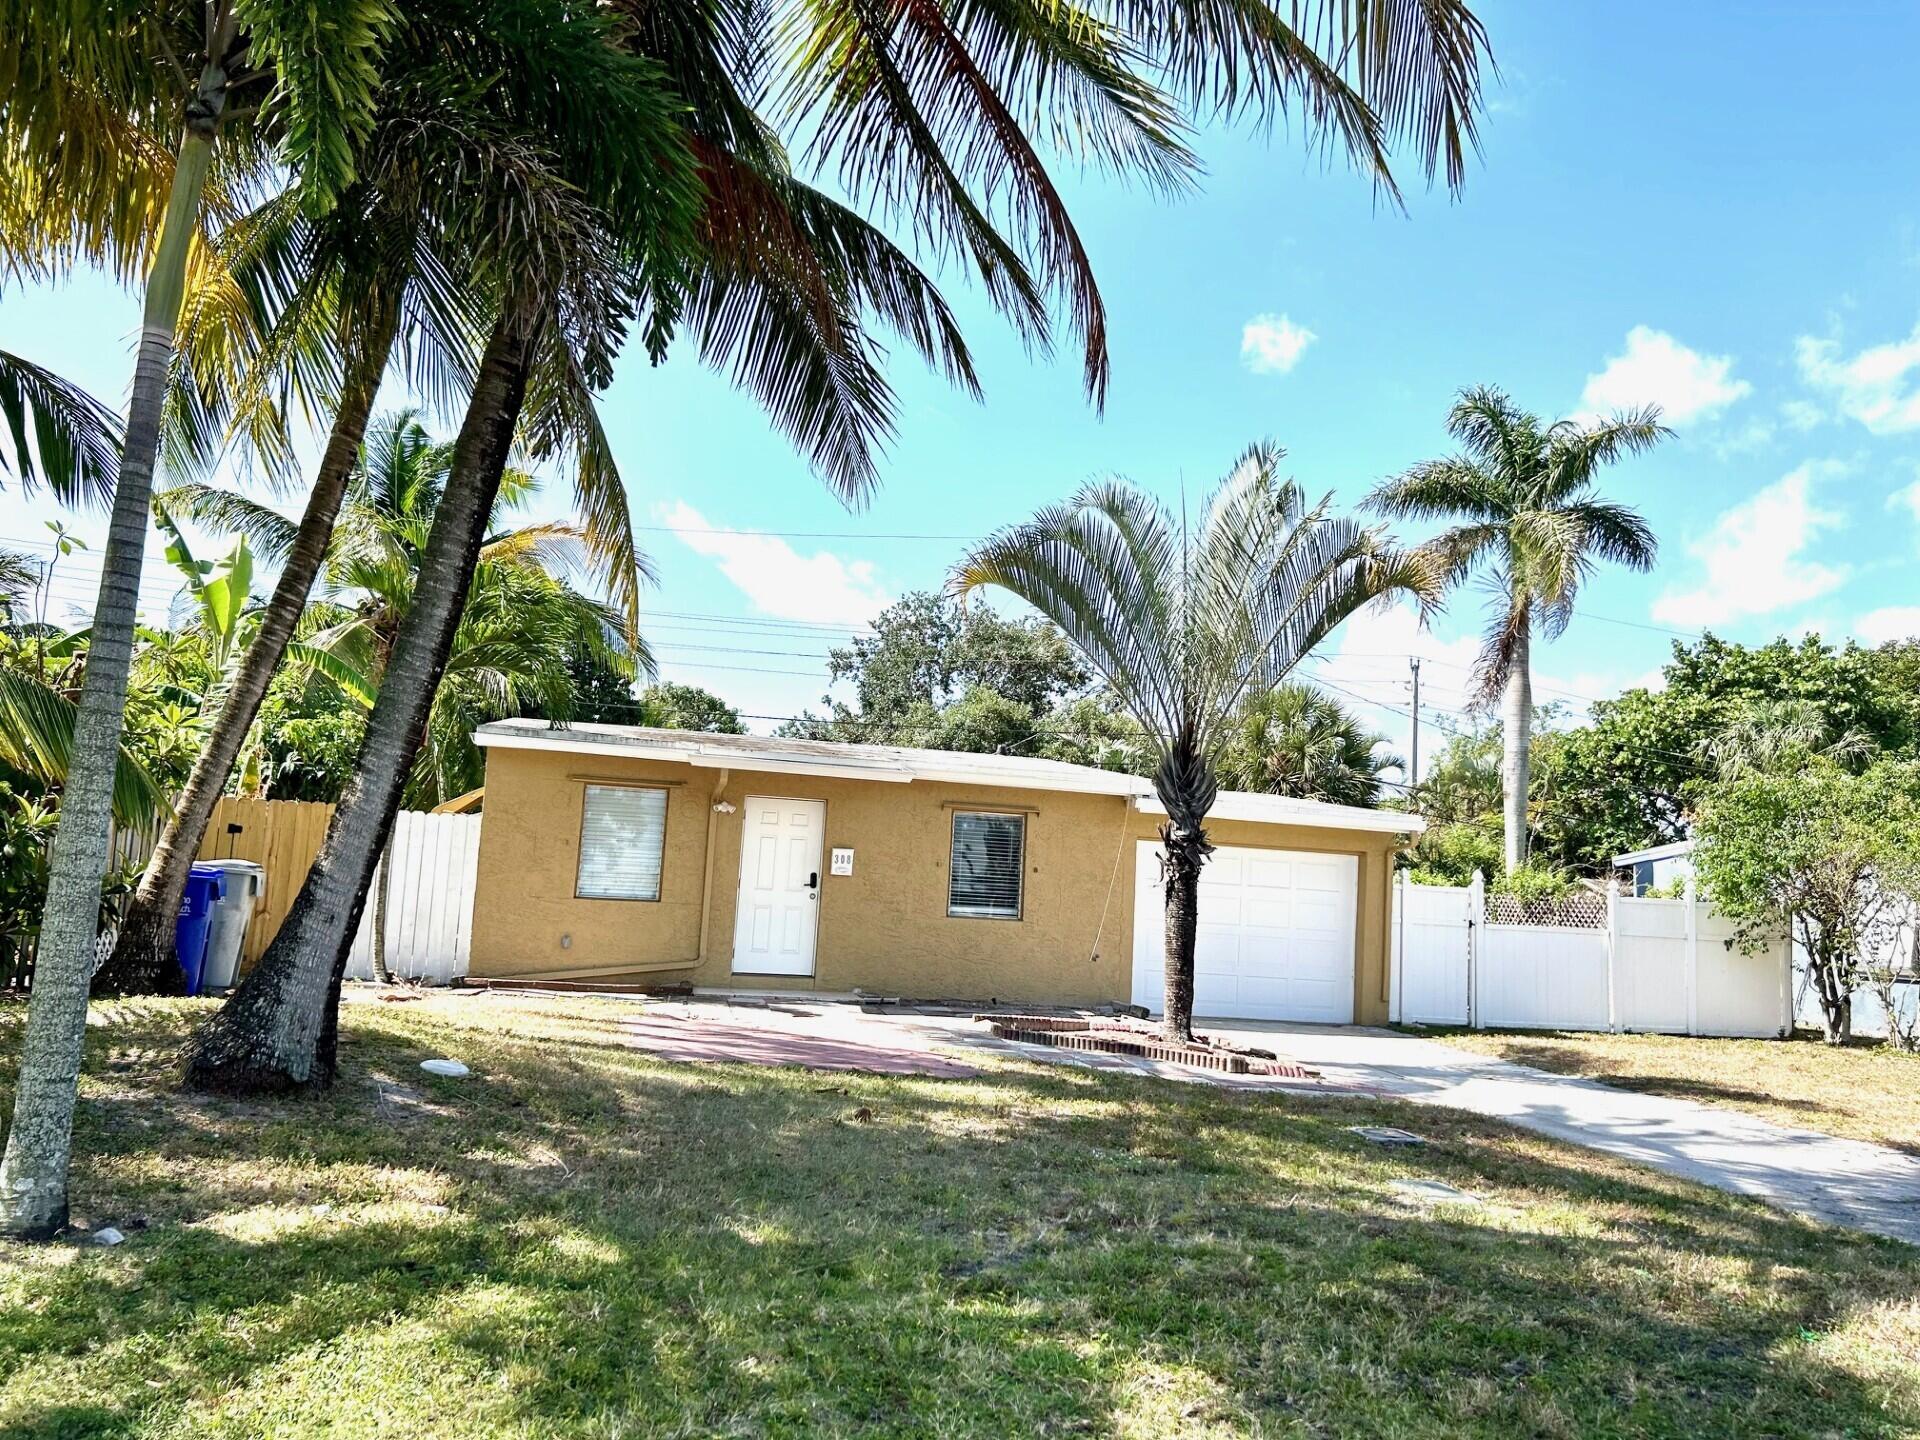 a view of a house with a yard and a palm tree